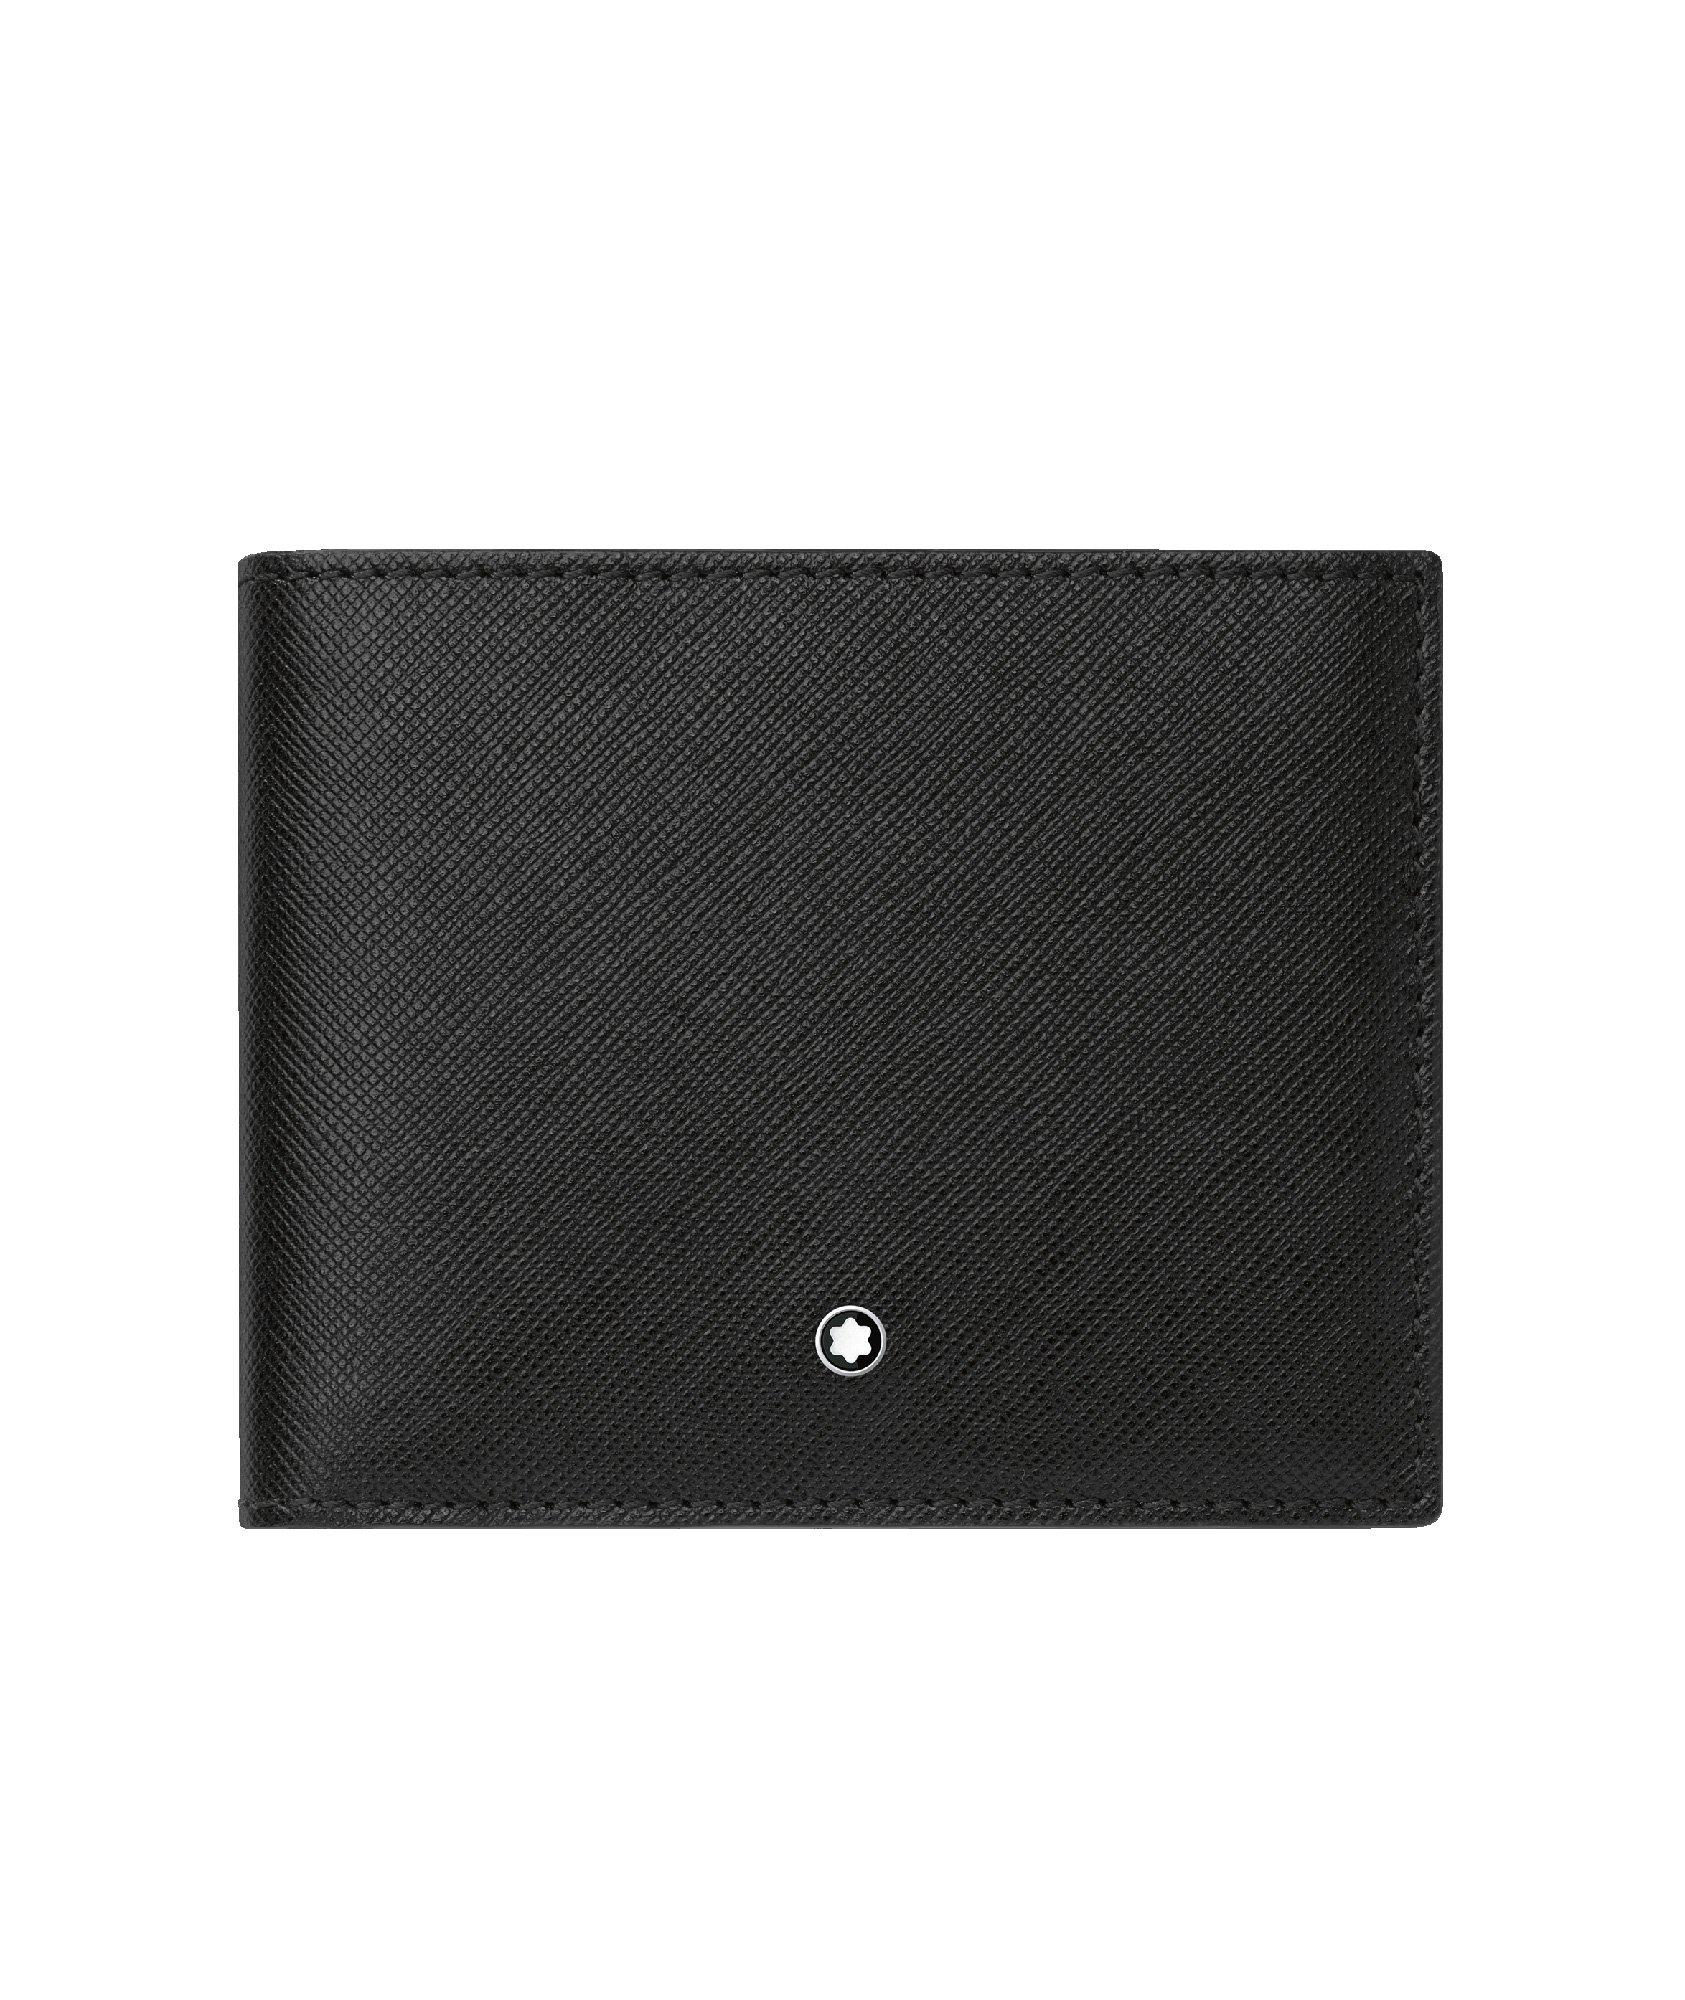 Leather Wallet image 0